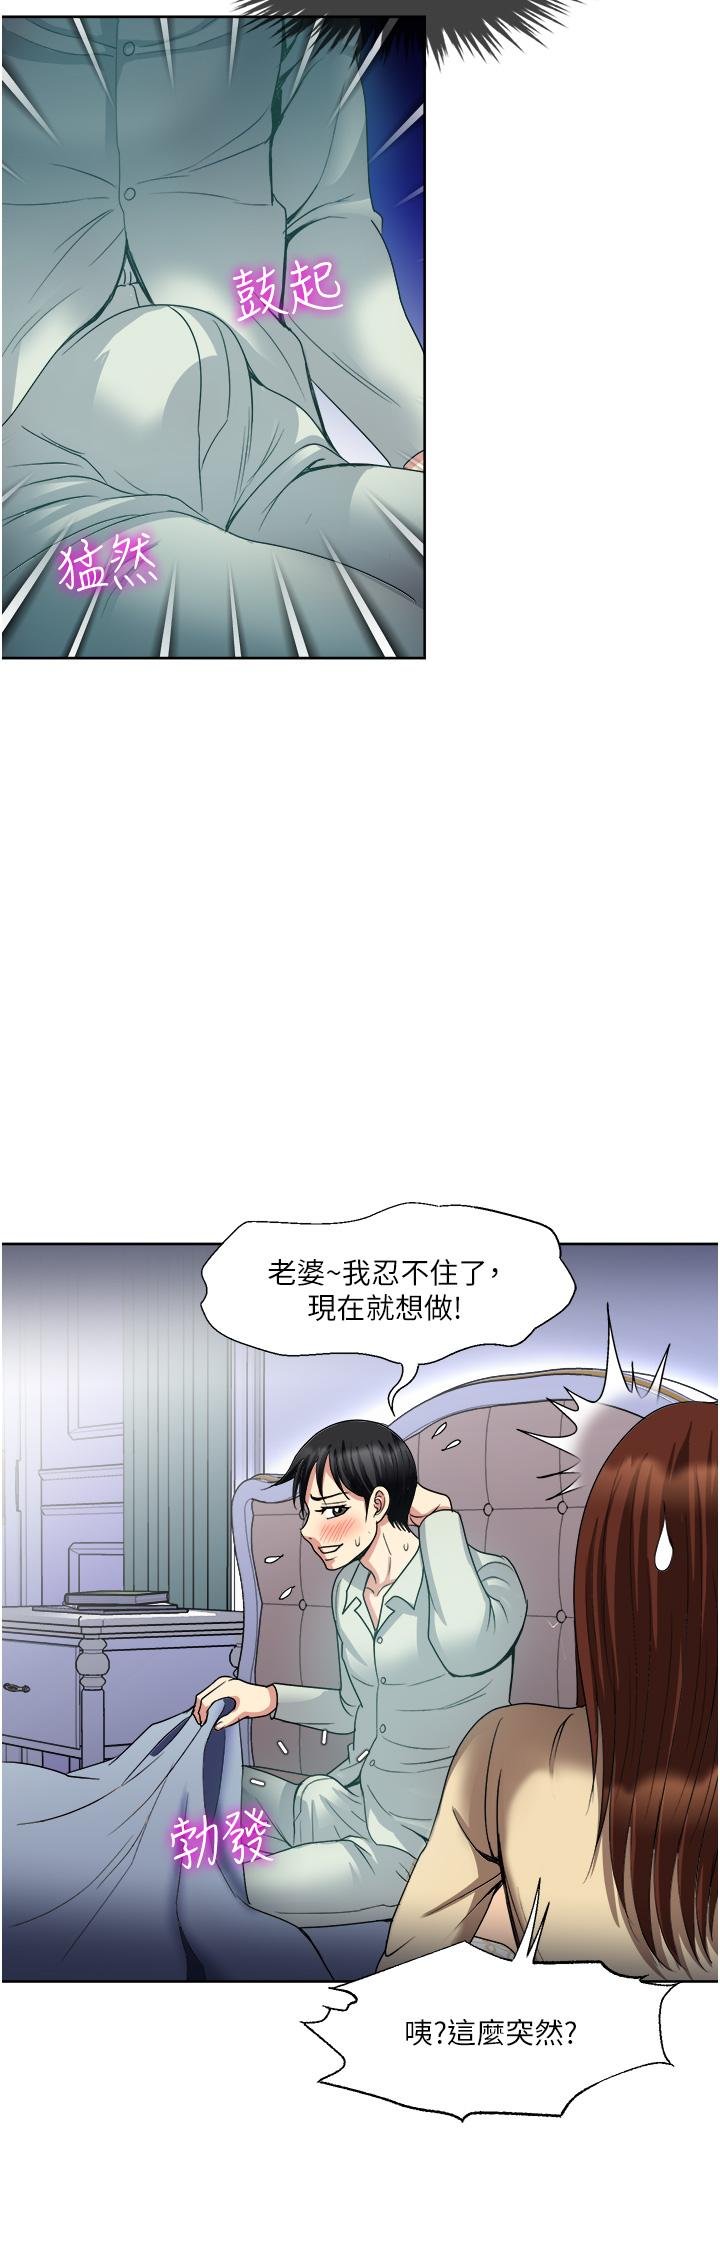 just-once-raw-chap-32-1